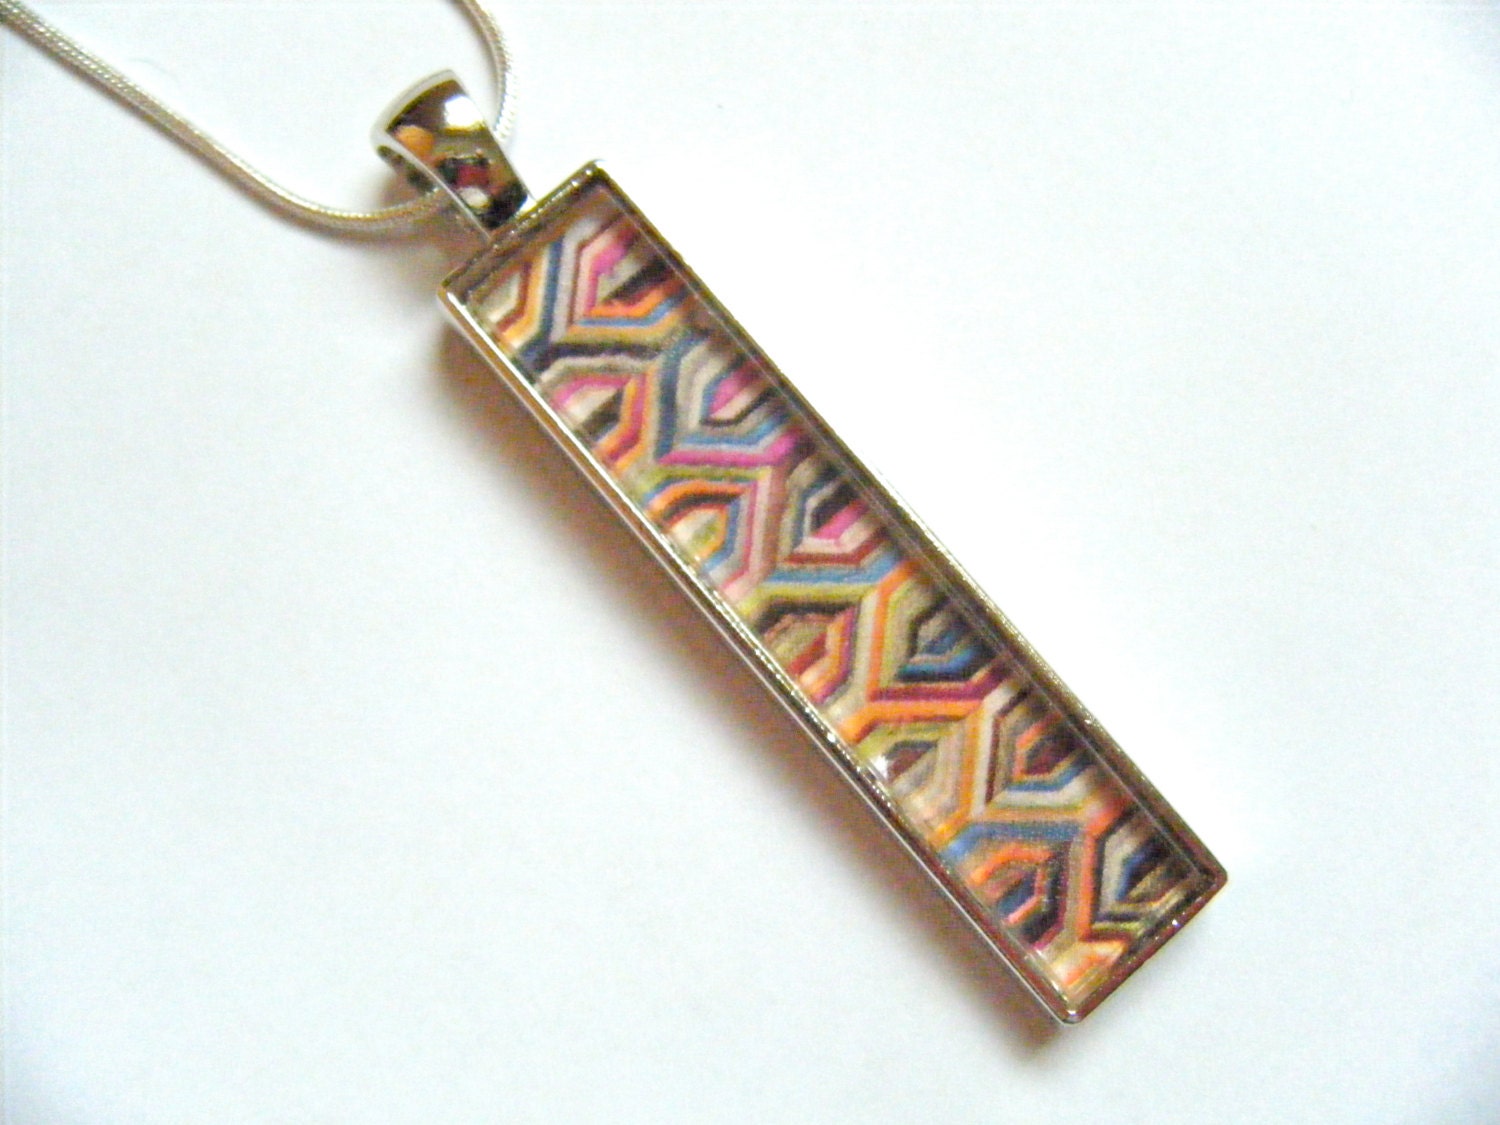 OOAK Colorful Chevron Glass Tile Necklace Pendant Modern Wearable Art Rectangle Metal Tray Recycled Repurposed Upcycled Magazine Jewelry - HeidiKindFinds